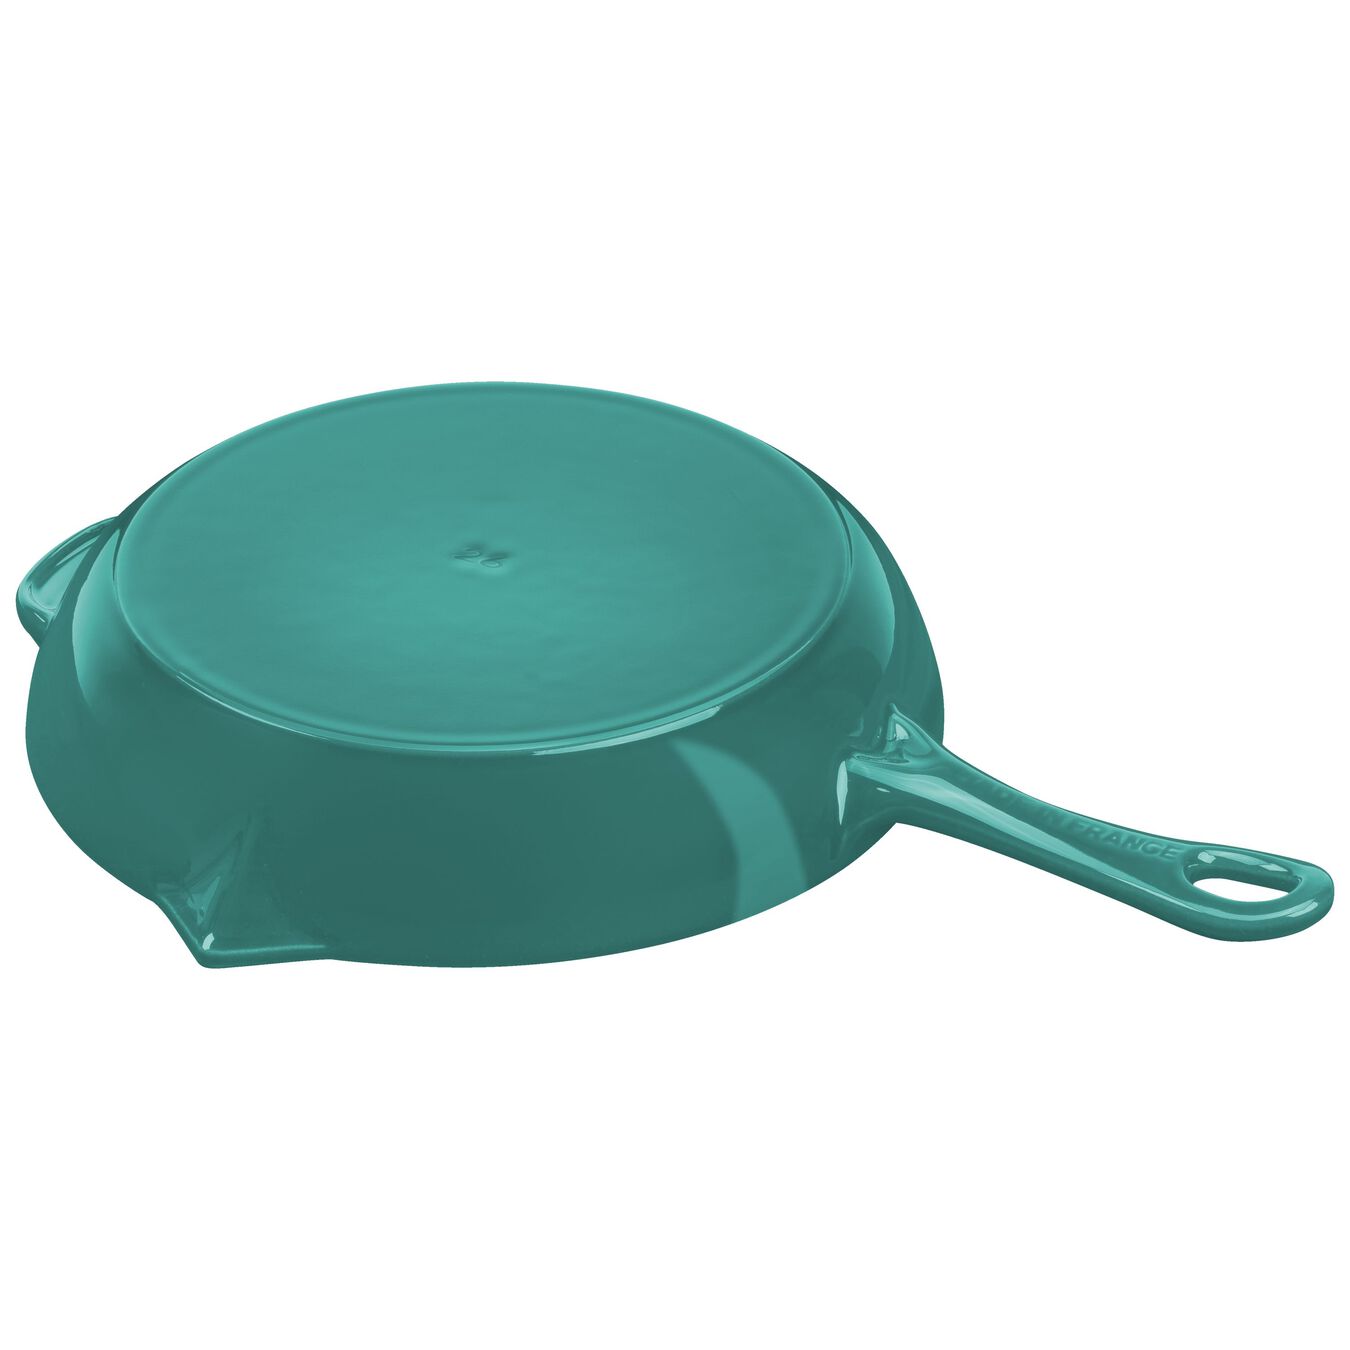 10-inch, Fry Pan, turquoise,,large 2